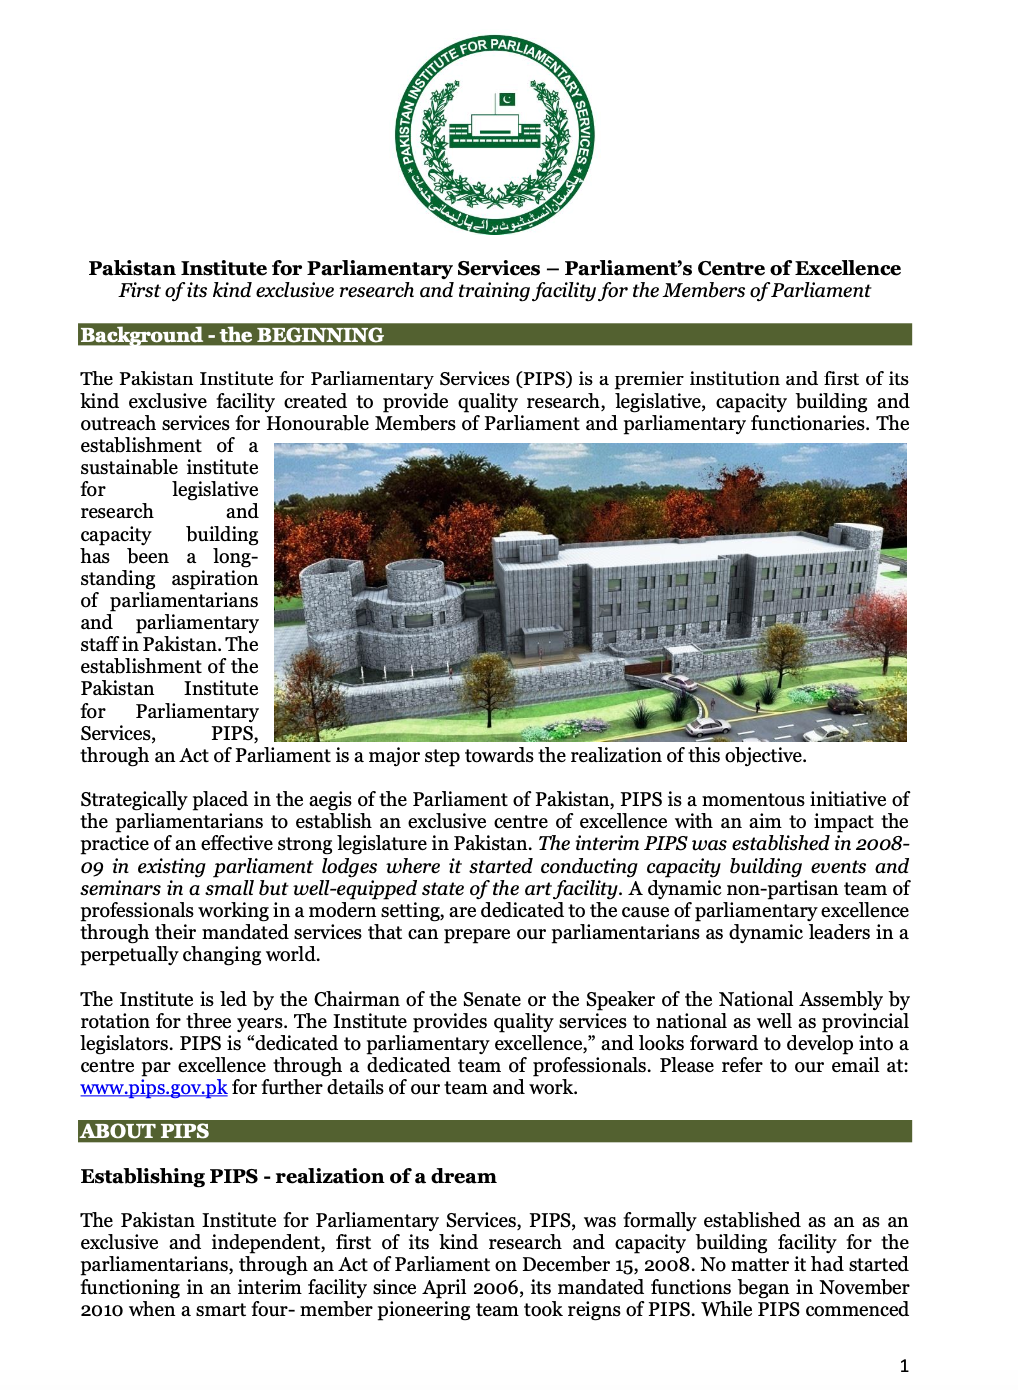 The Pakistan Institute for Parliamentary Services (PIPS) information package